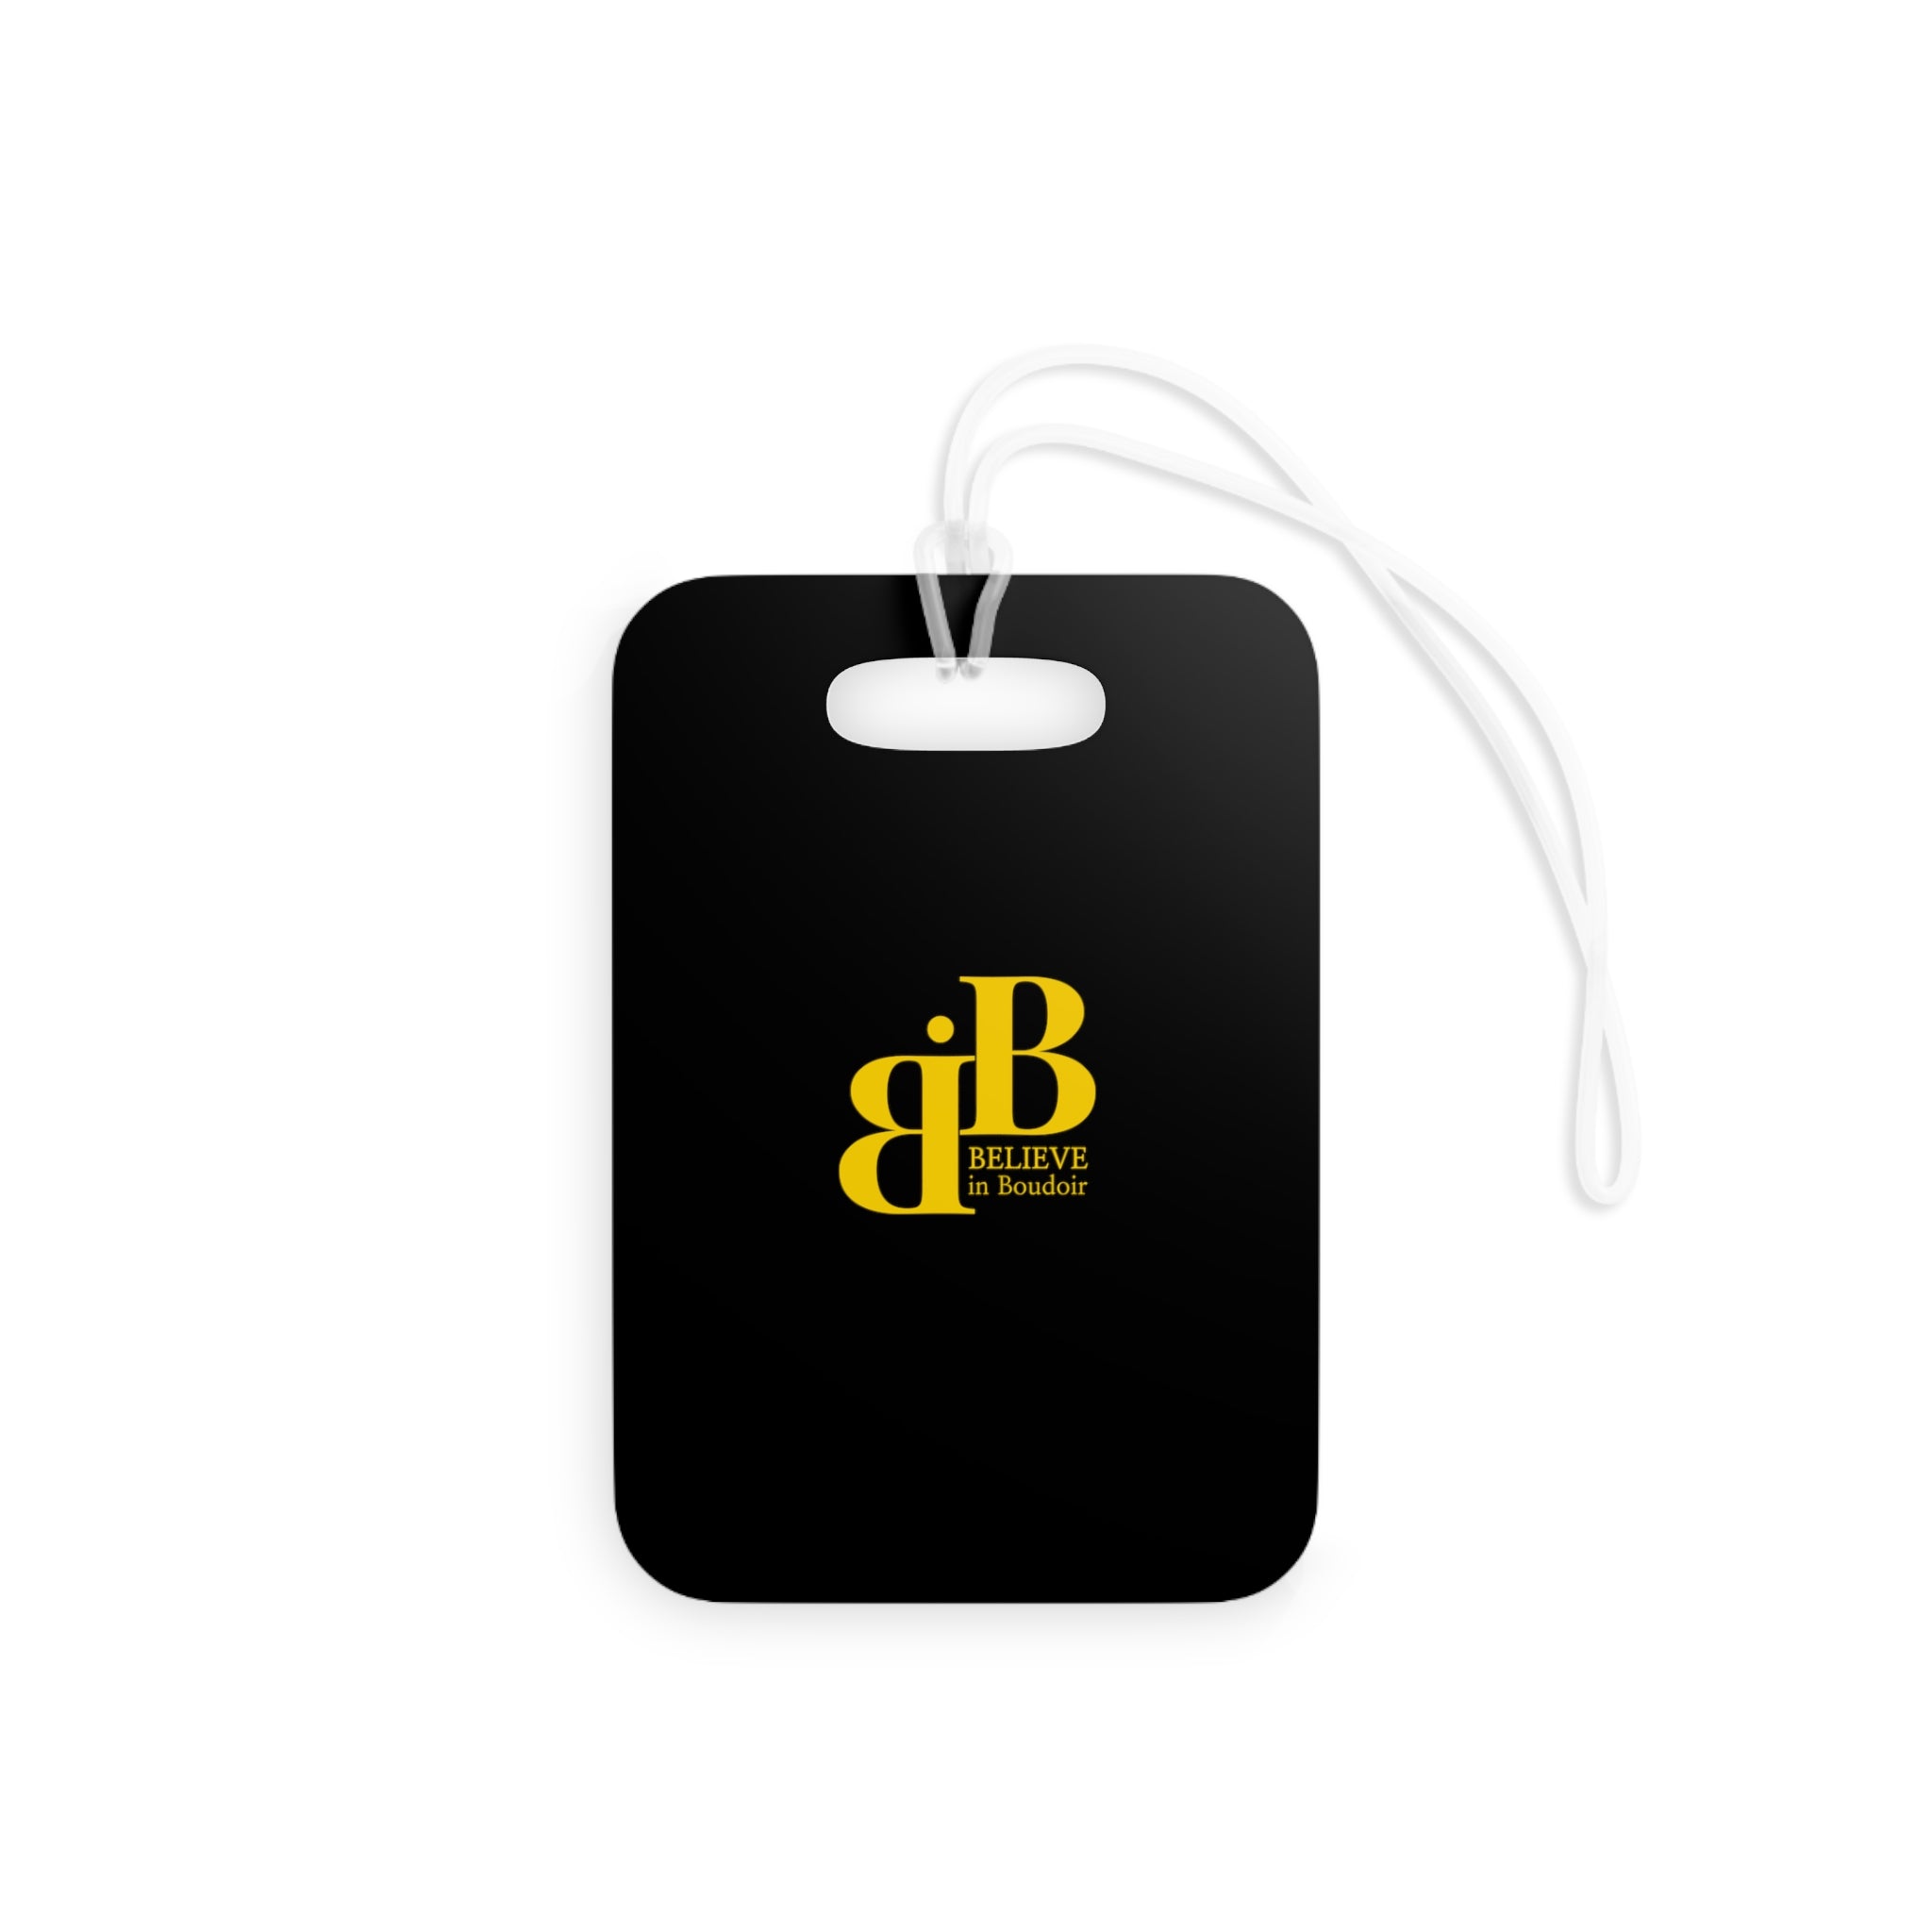 Inverse Square Law Luggage Tags for Photographers